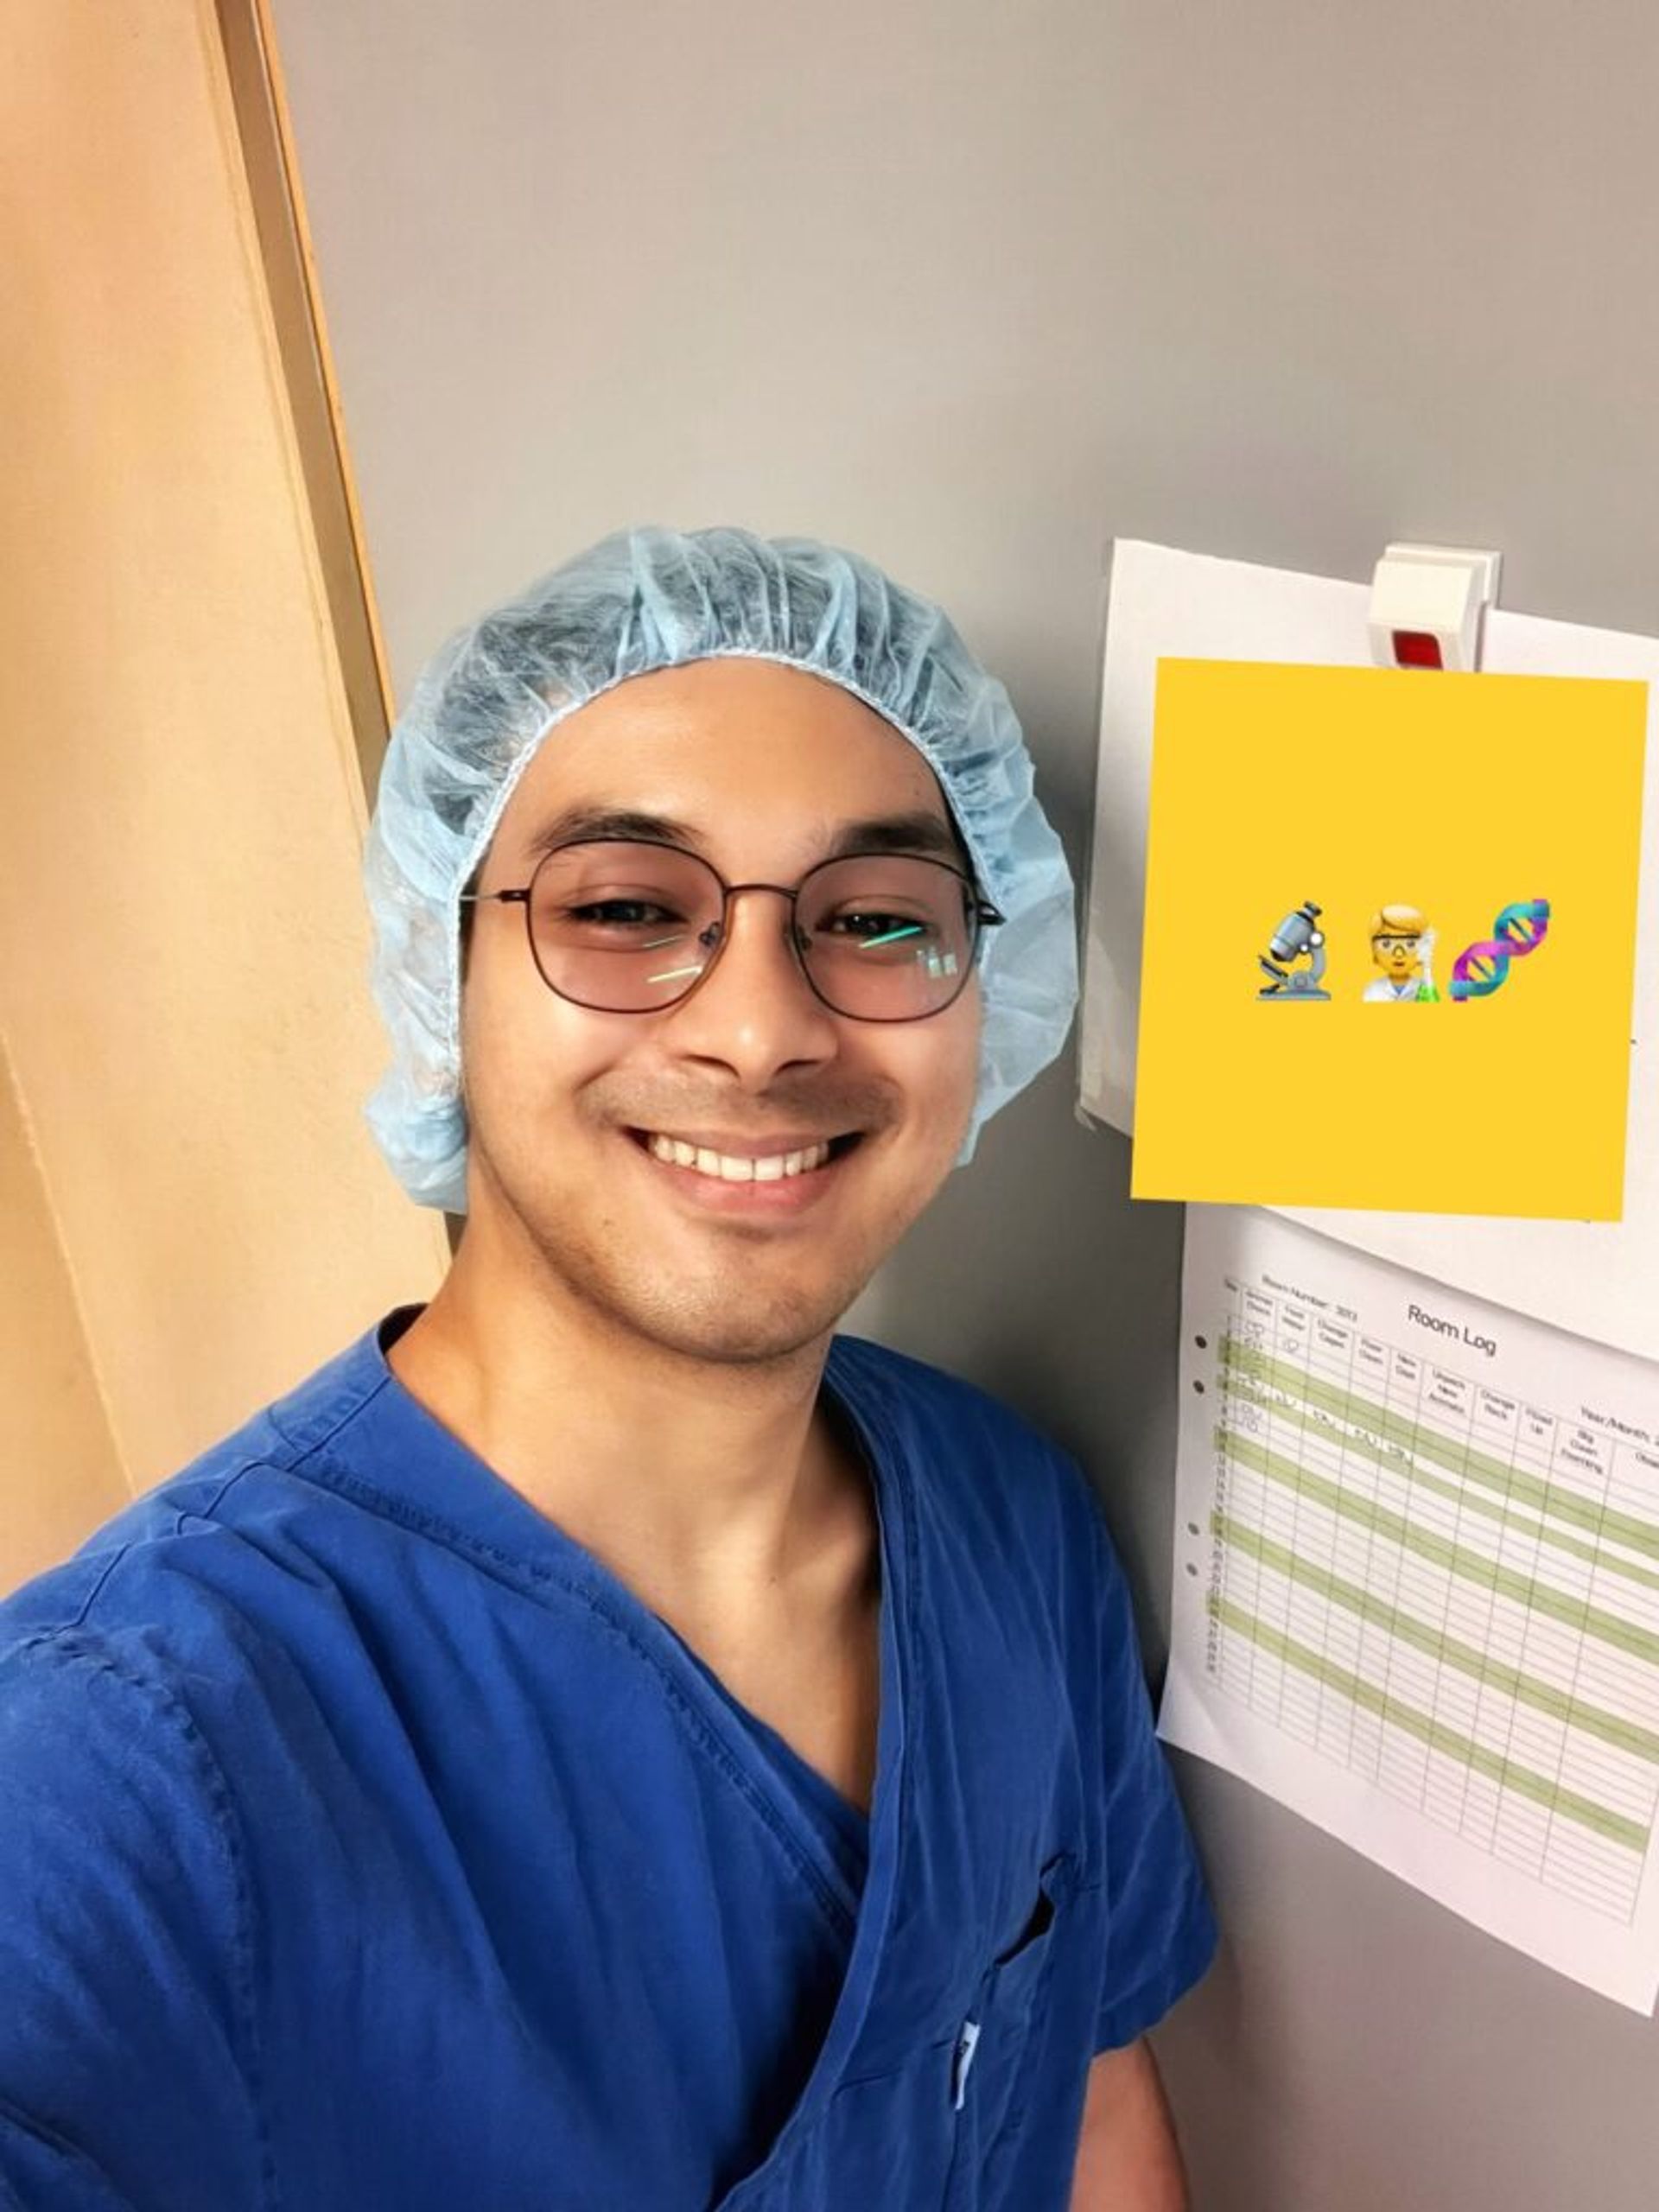 A picture of TJ, Masters student at his workplace smiling